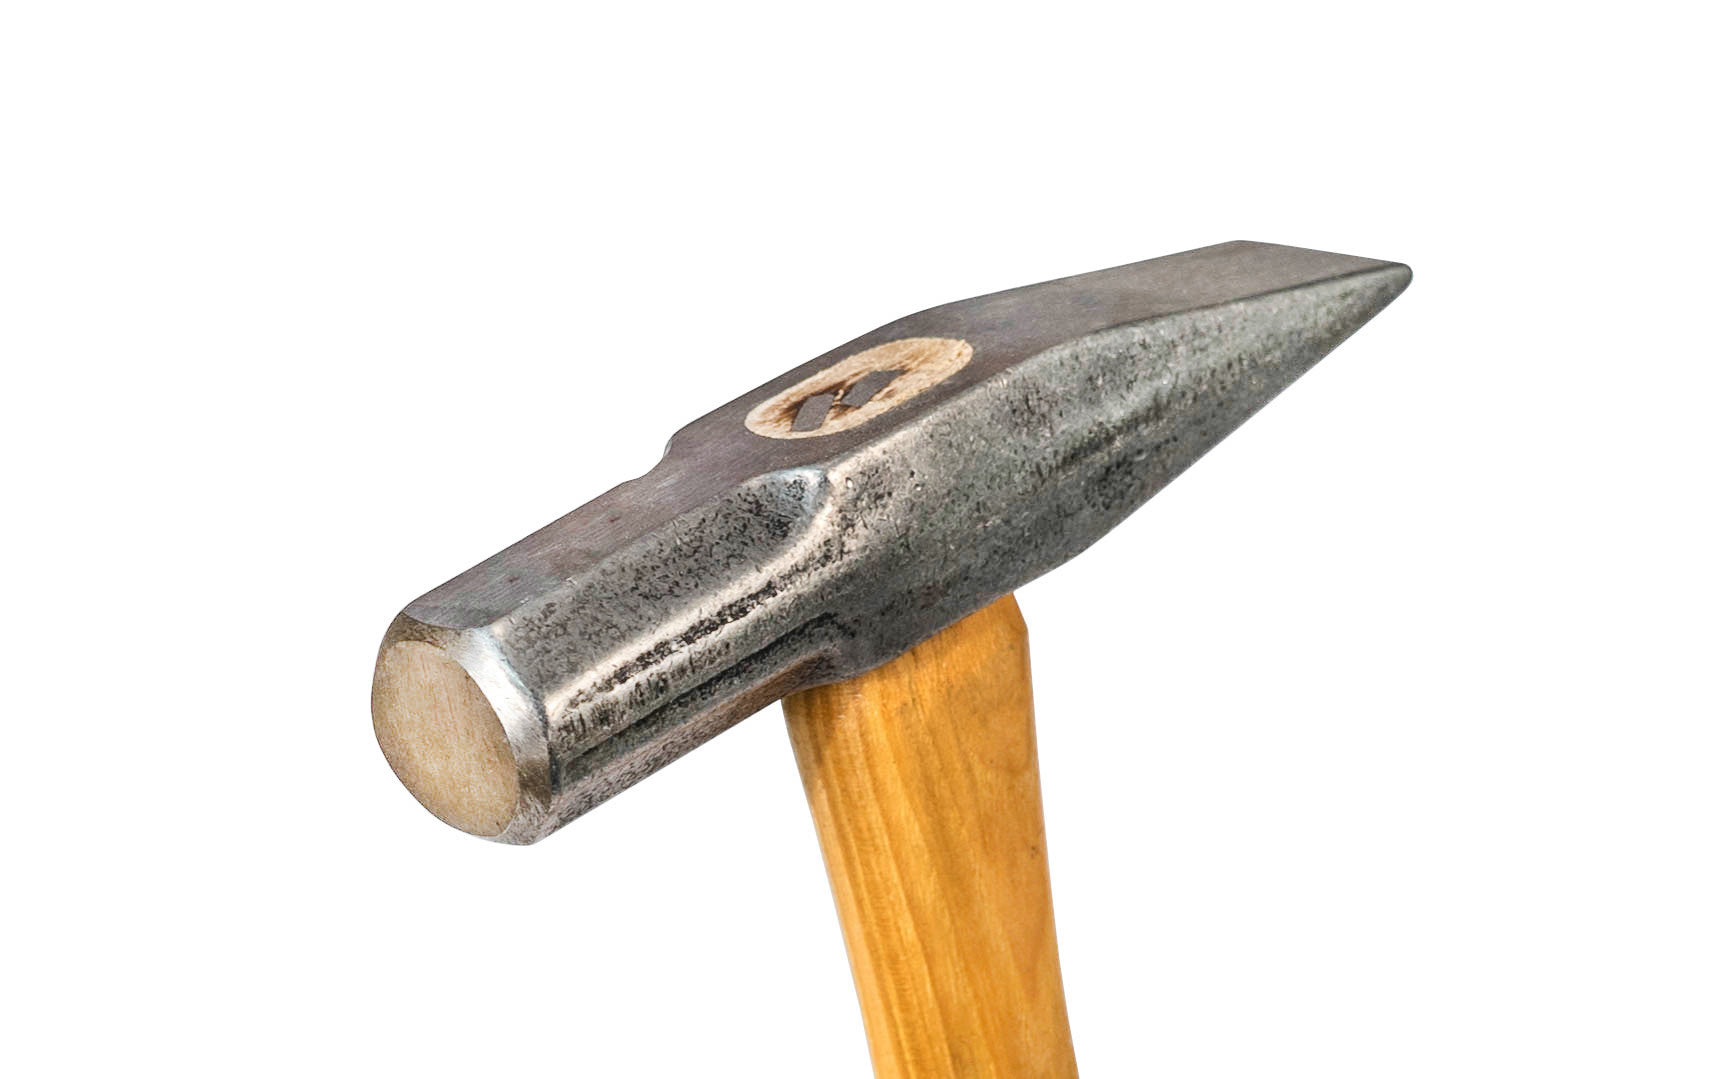 C.S. Osborne Riveting/Cross Peen Hammer No. 62 ~ Hardened & tempered with a drop-forged head and genuine hickory handle. ~ Made in the USA ~ 096685561127